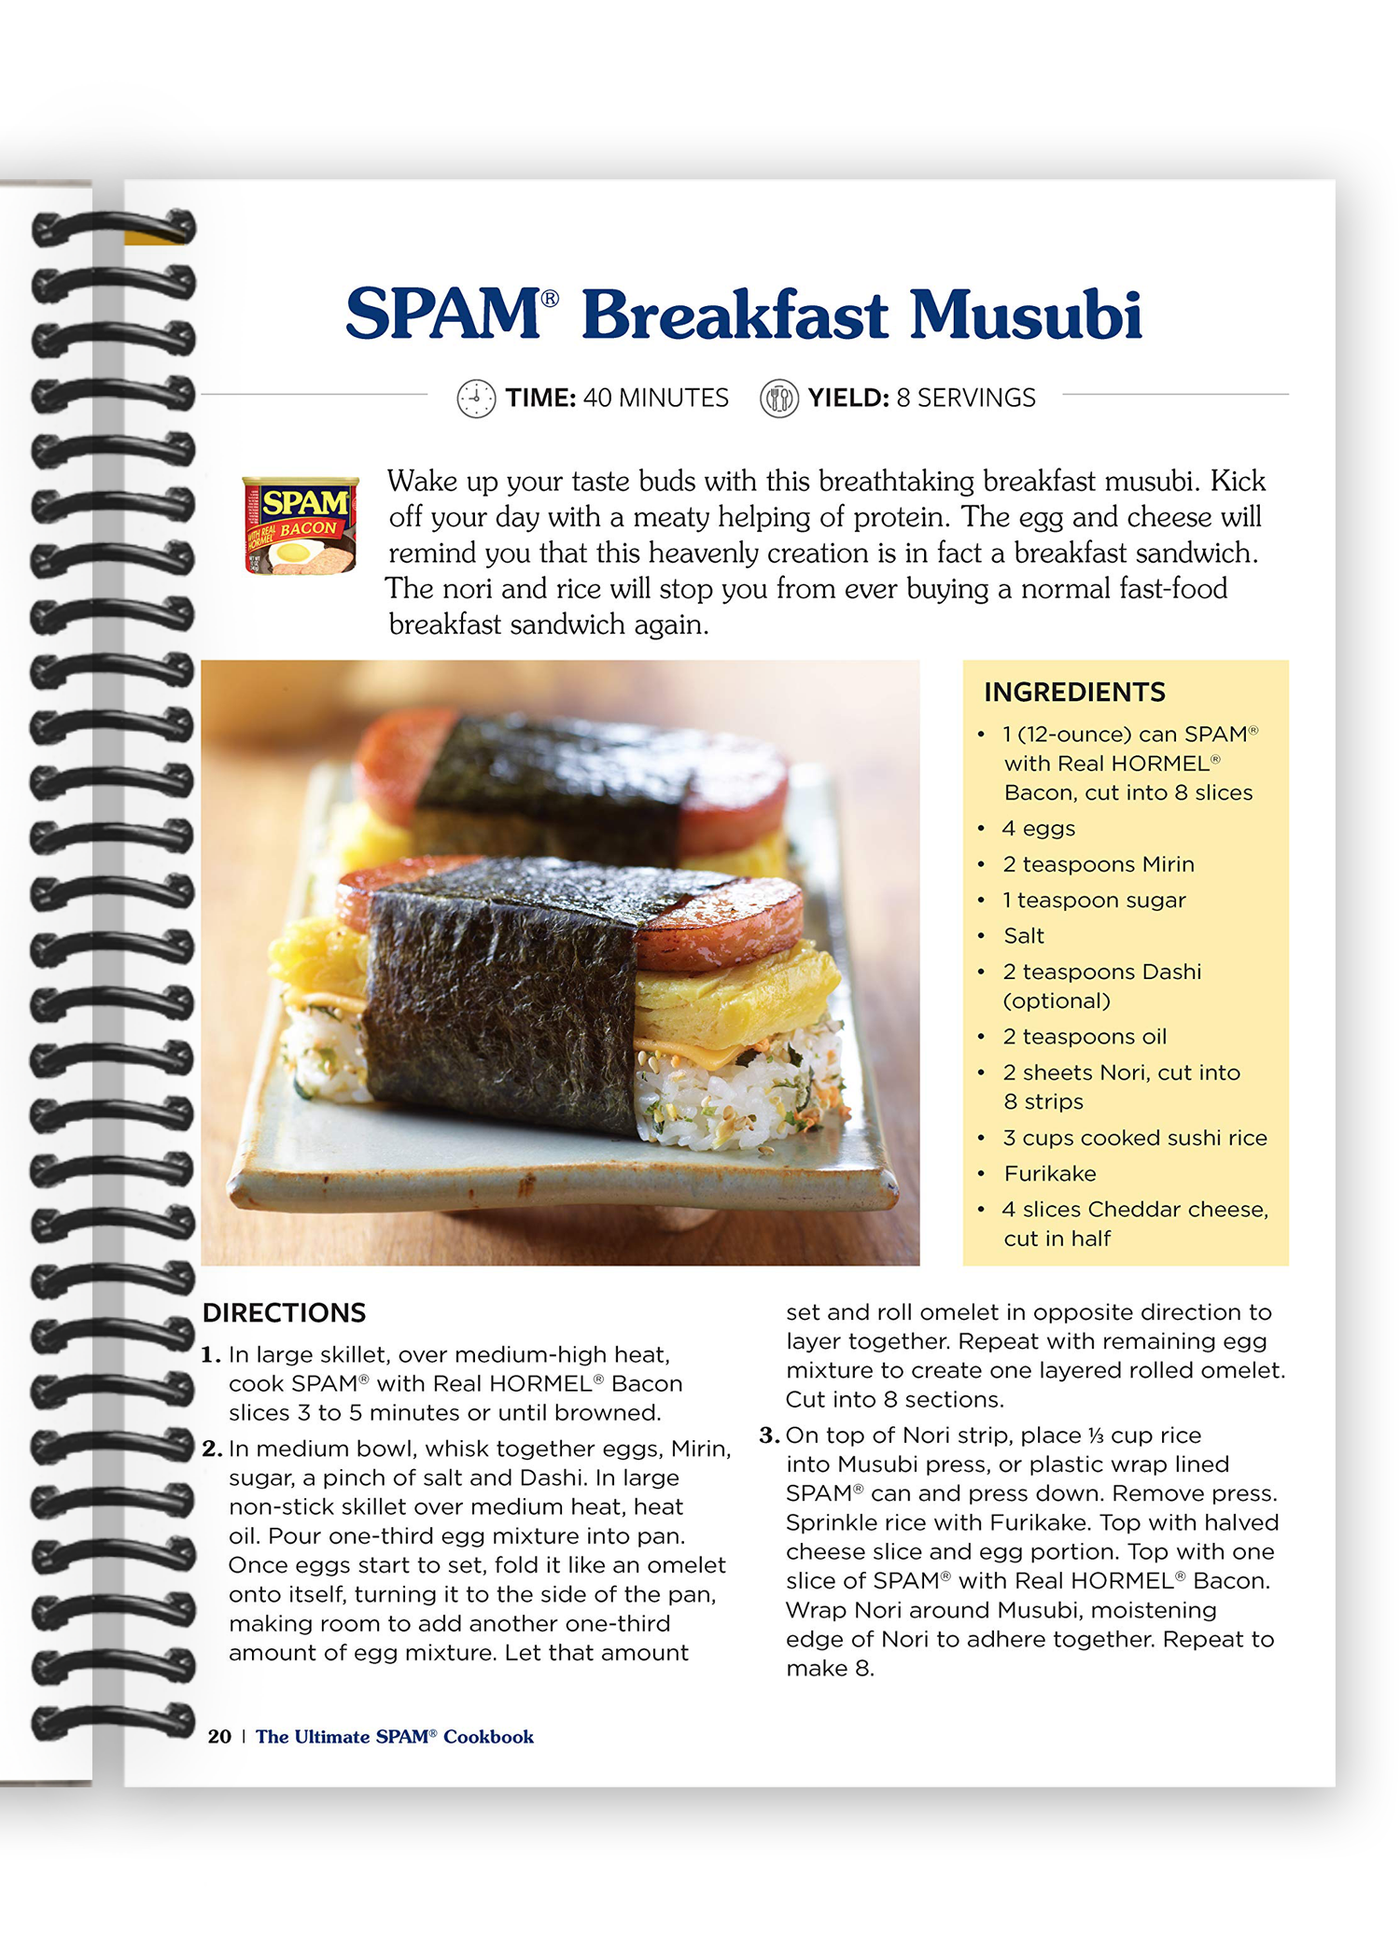 The Ultimate SPAM Cookbook: 100+ Quick and Delicious Recipes from Traditional to Gourmet (Spiral Bound)